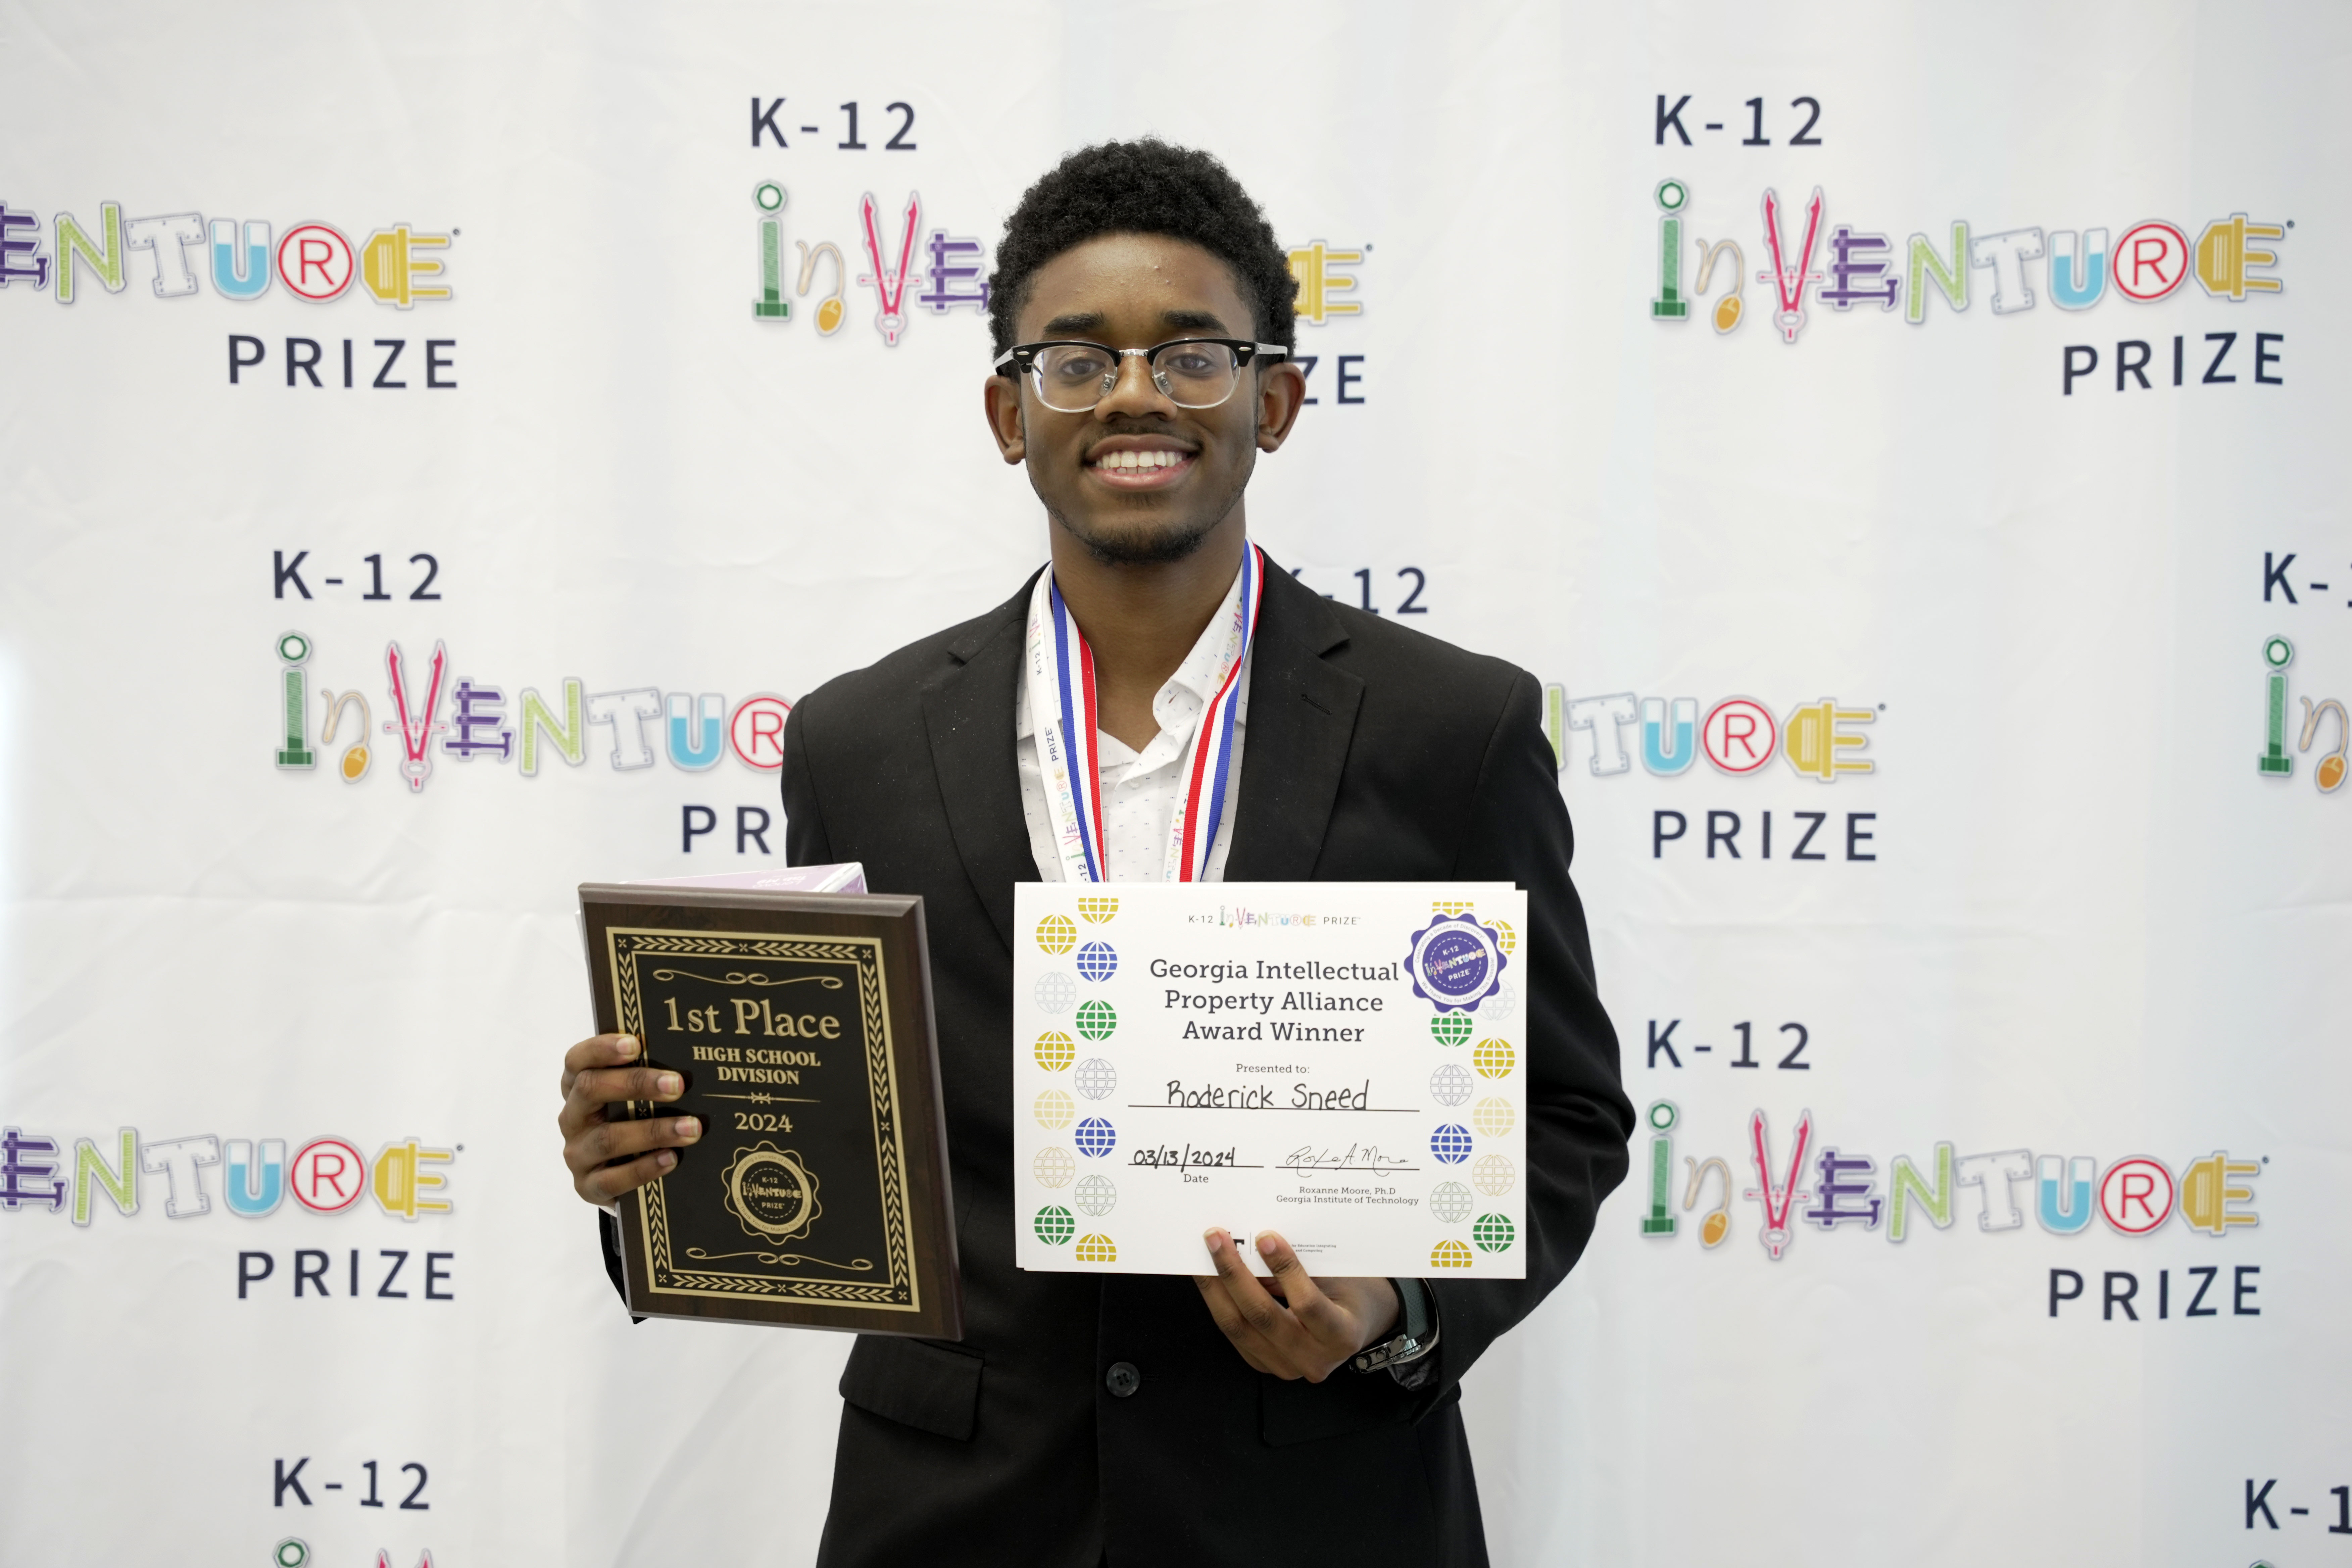 A smiling student holding a plaque and certificate